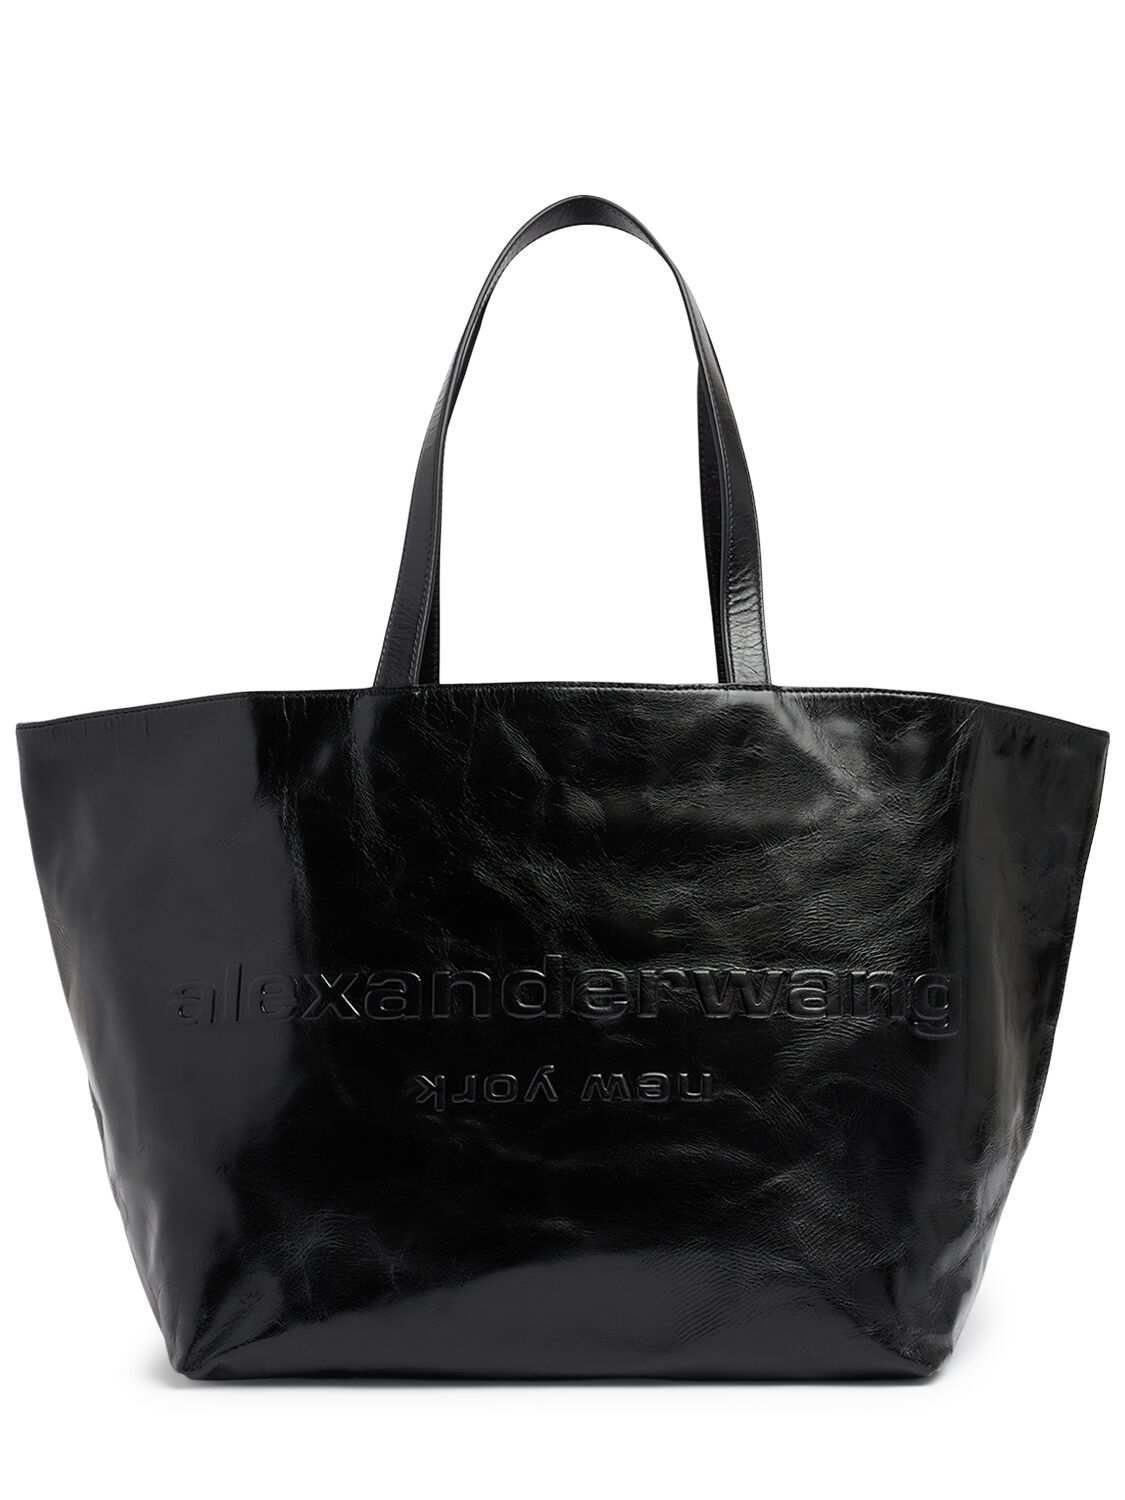 Punch Crackle Patent Leather Tote Bag